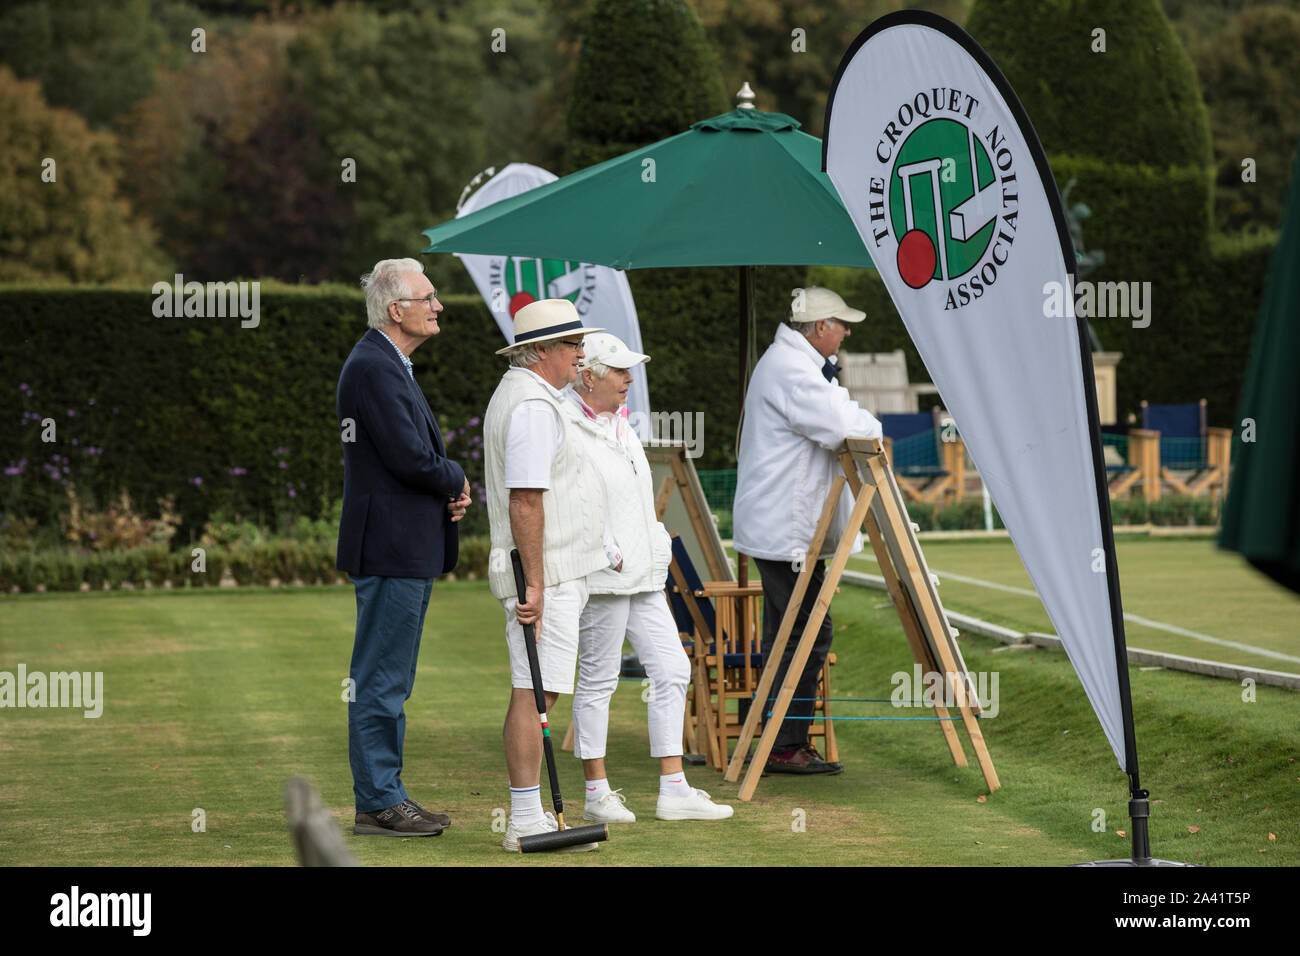 Phyllis Court V Nottingham in the National Golf Croquet Inter-Club Championship Final at Phyllis Court Club, Henley on Thames, England, UK Stock Photo